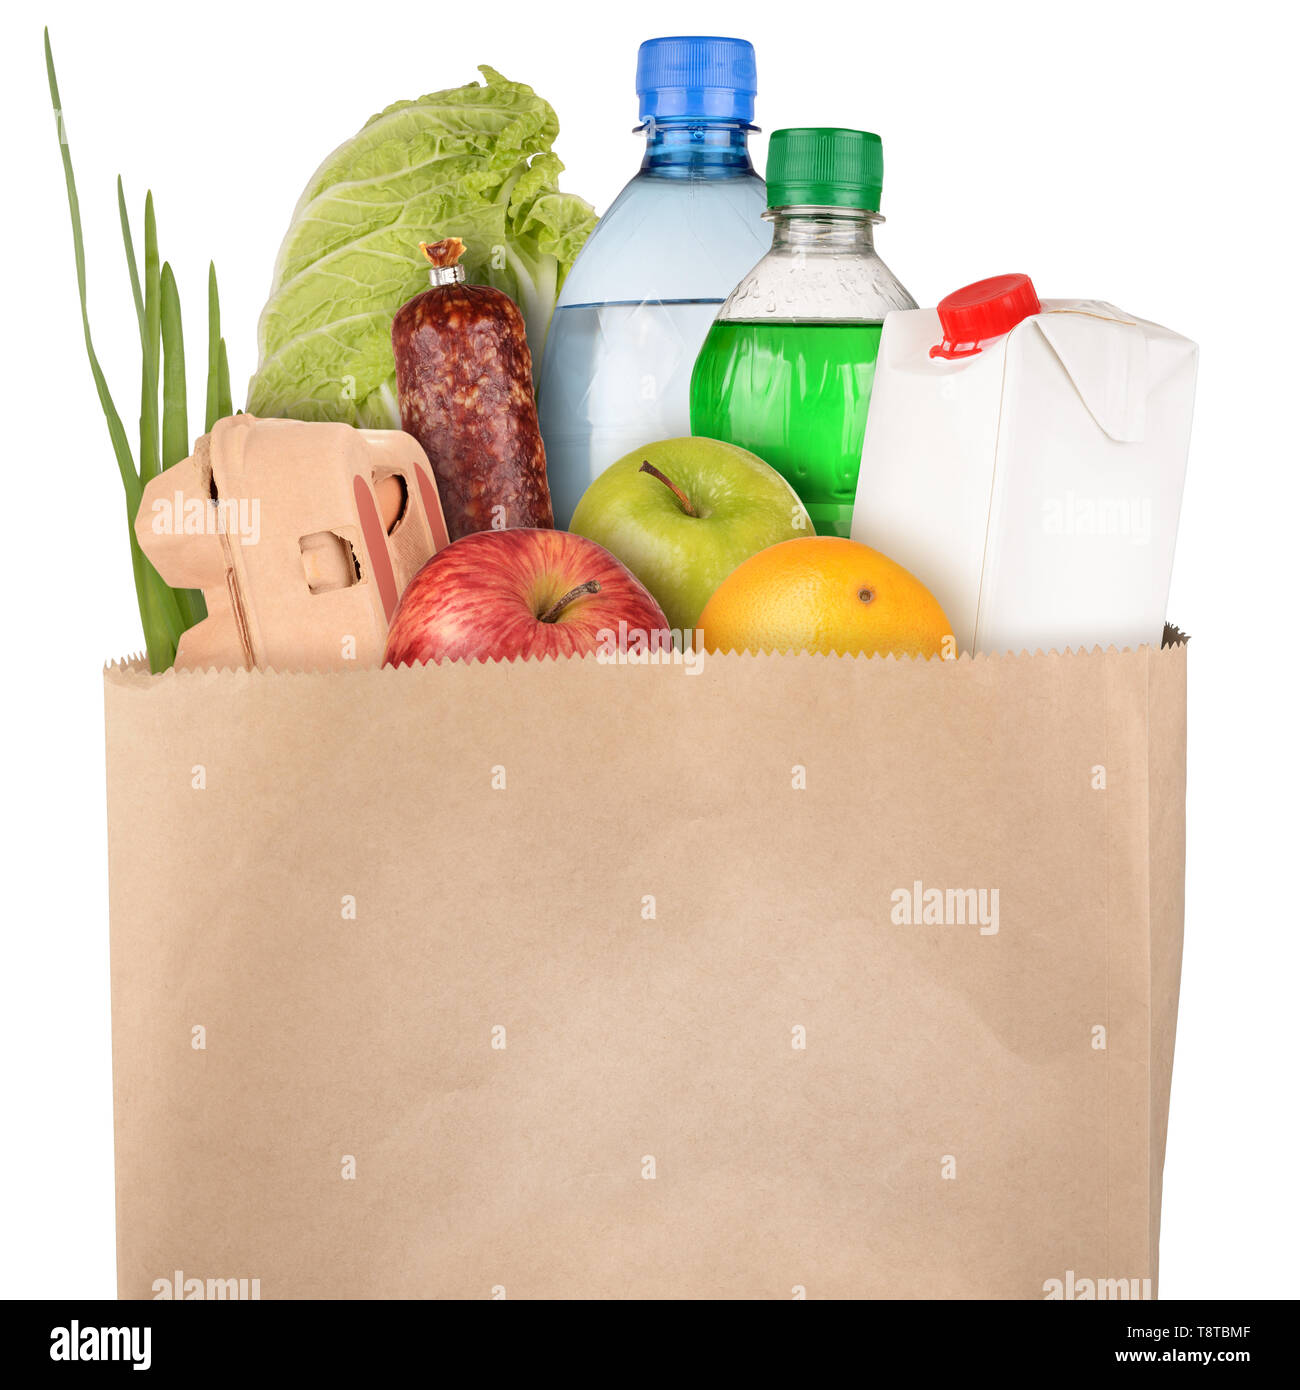 Bag of groceries isolated on white background Stock Photo